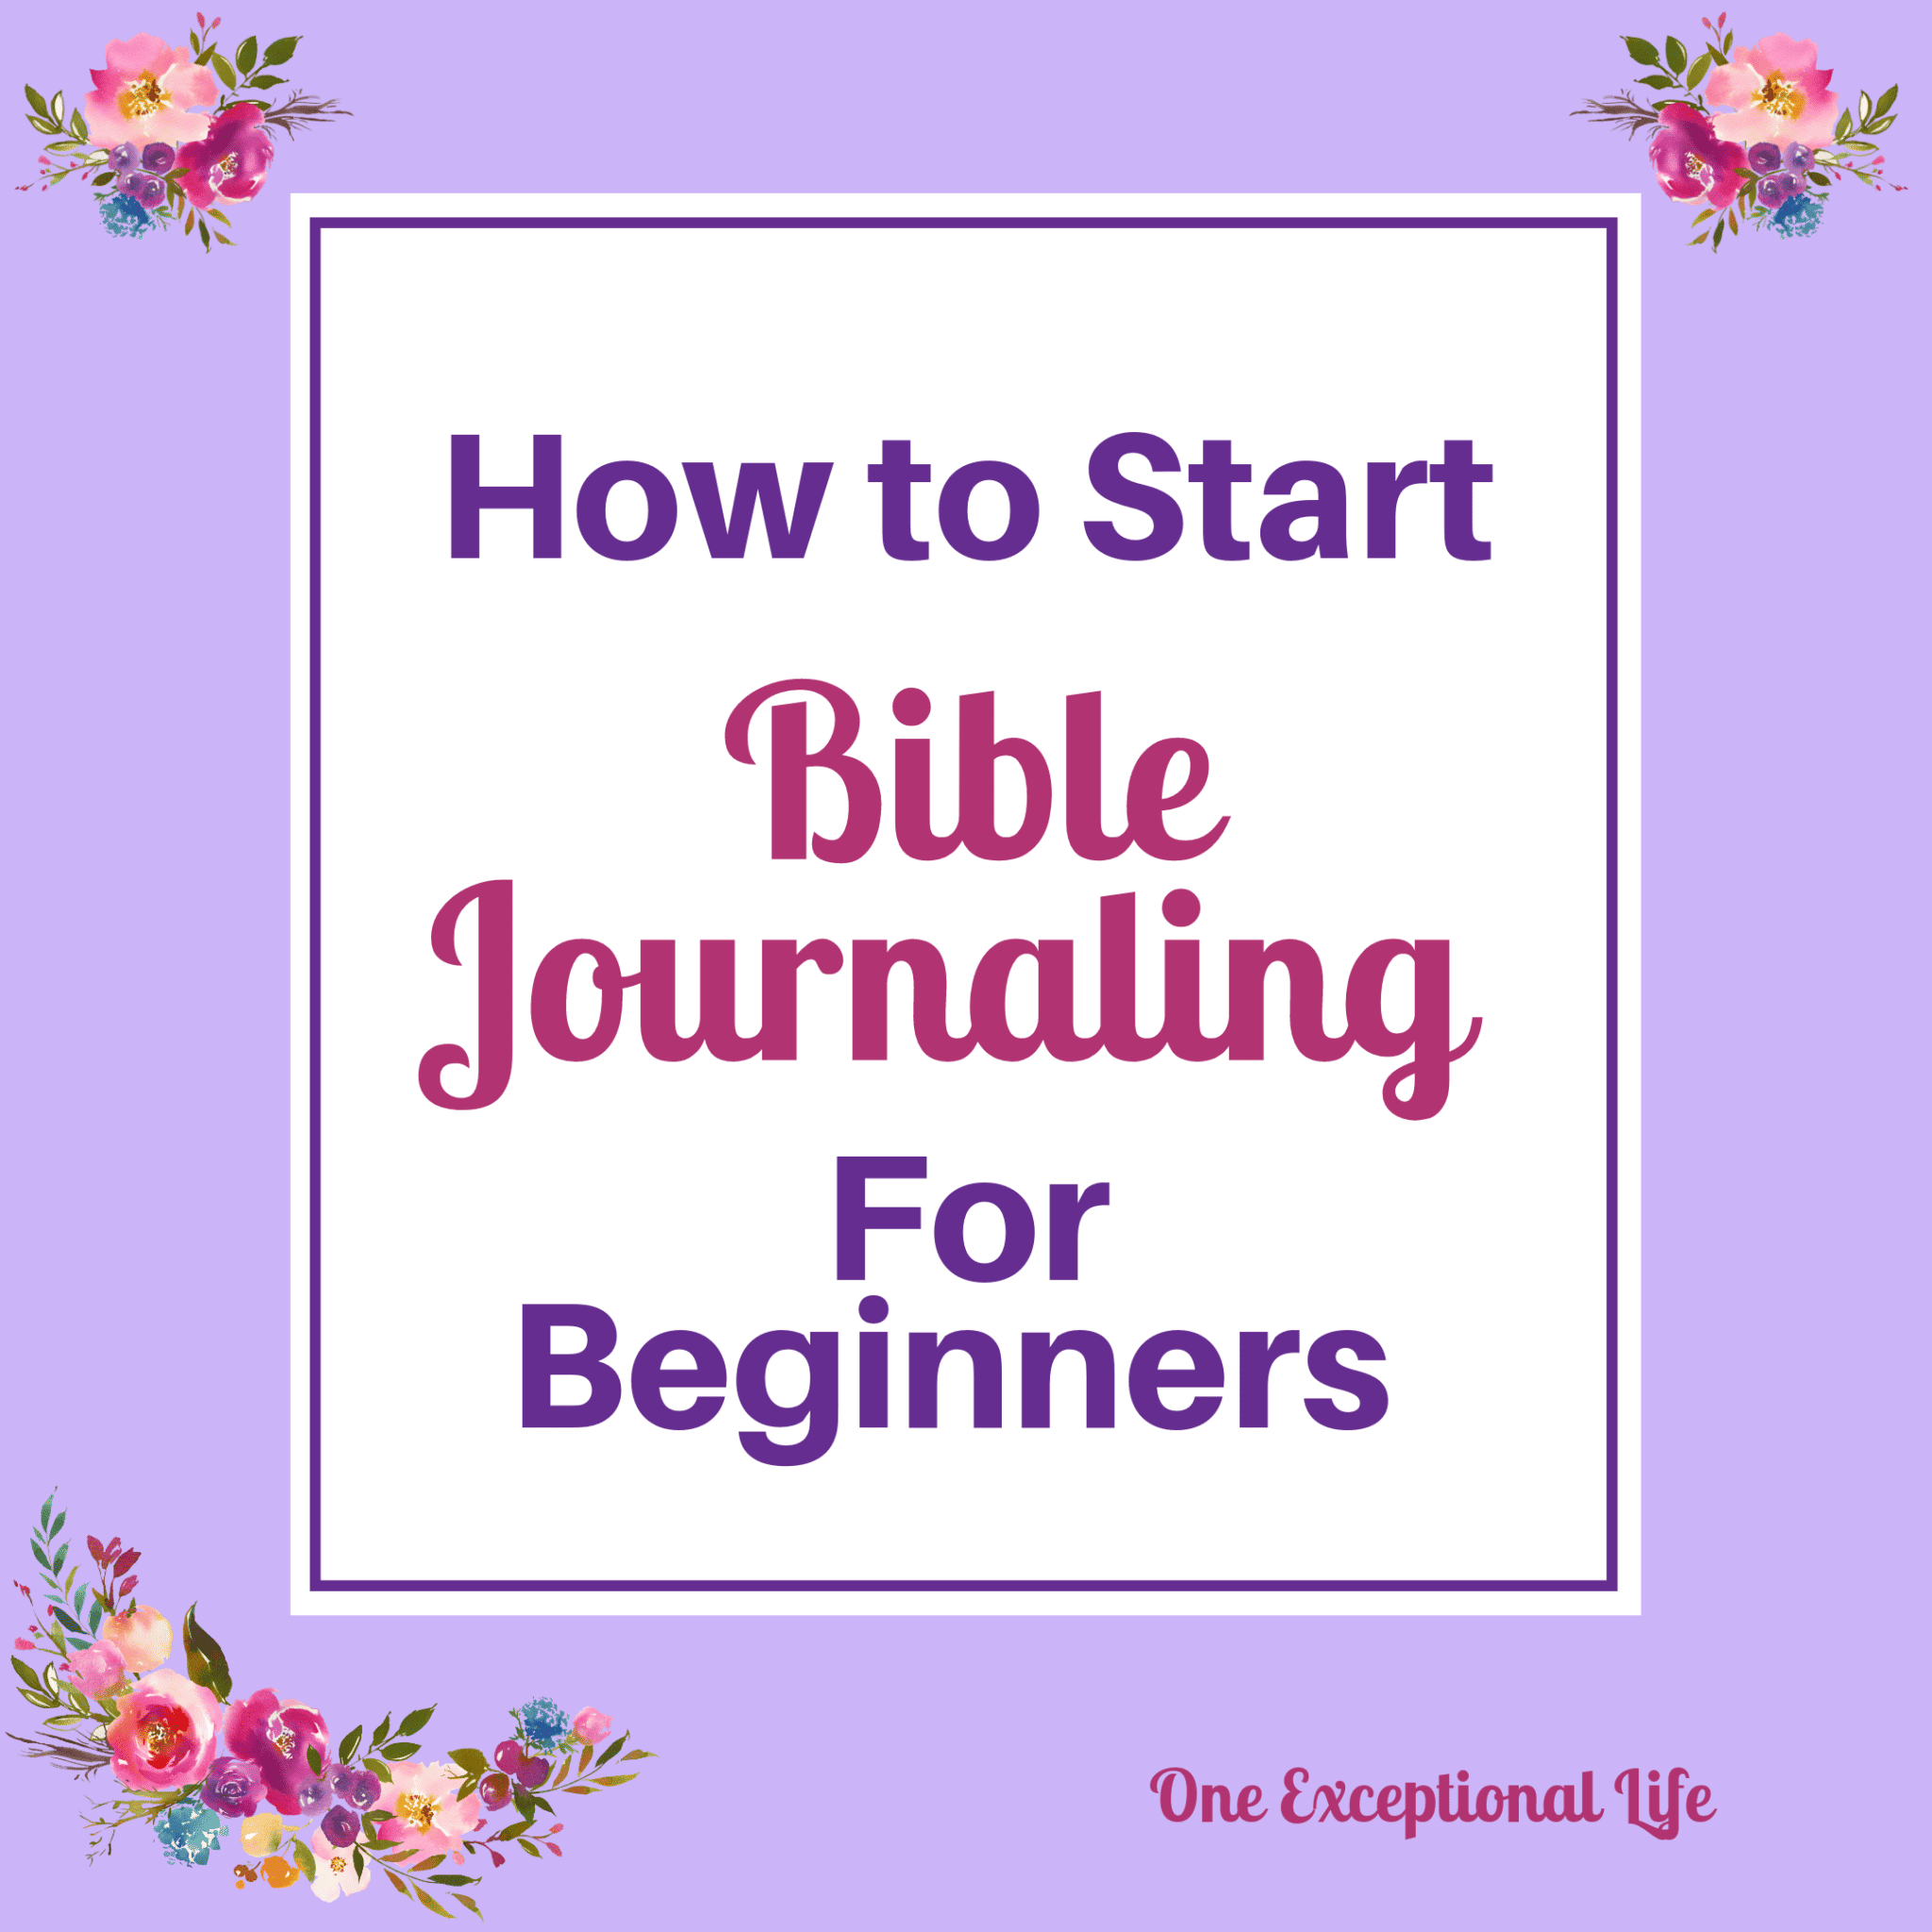 How to Start Bible Journaling for Beginners